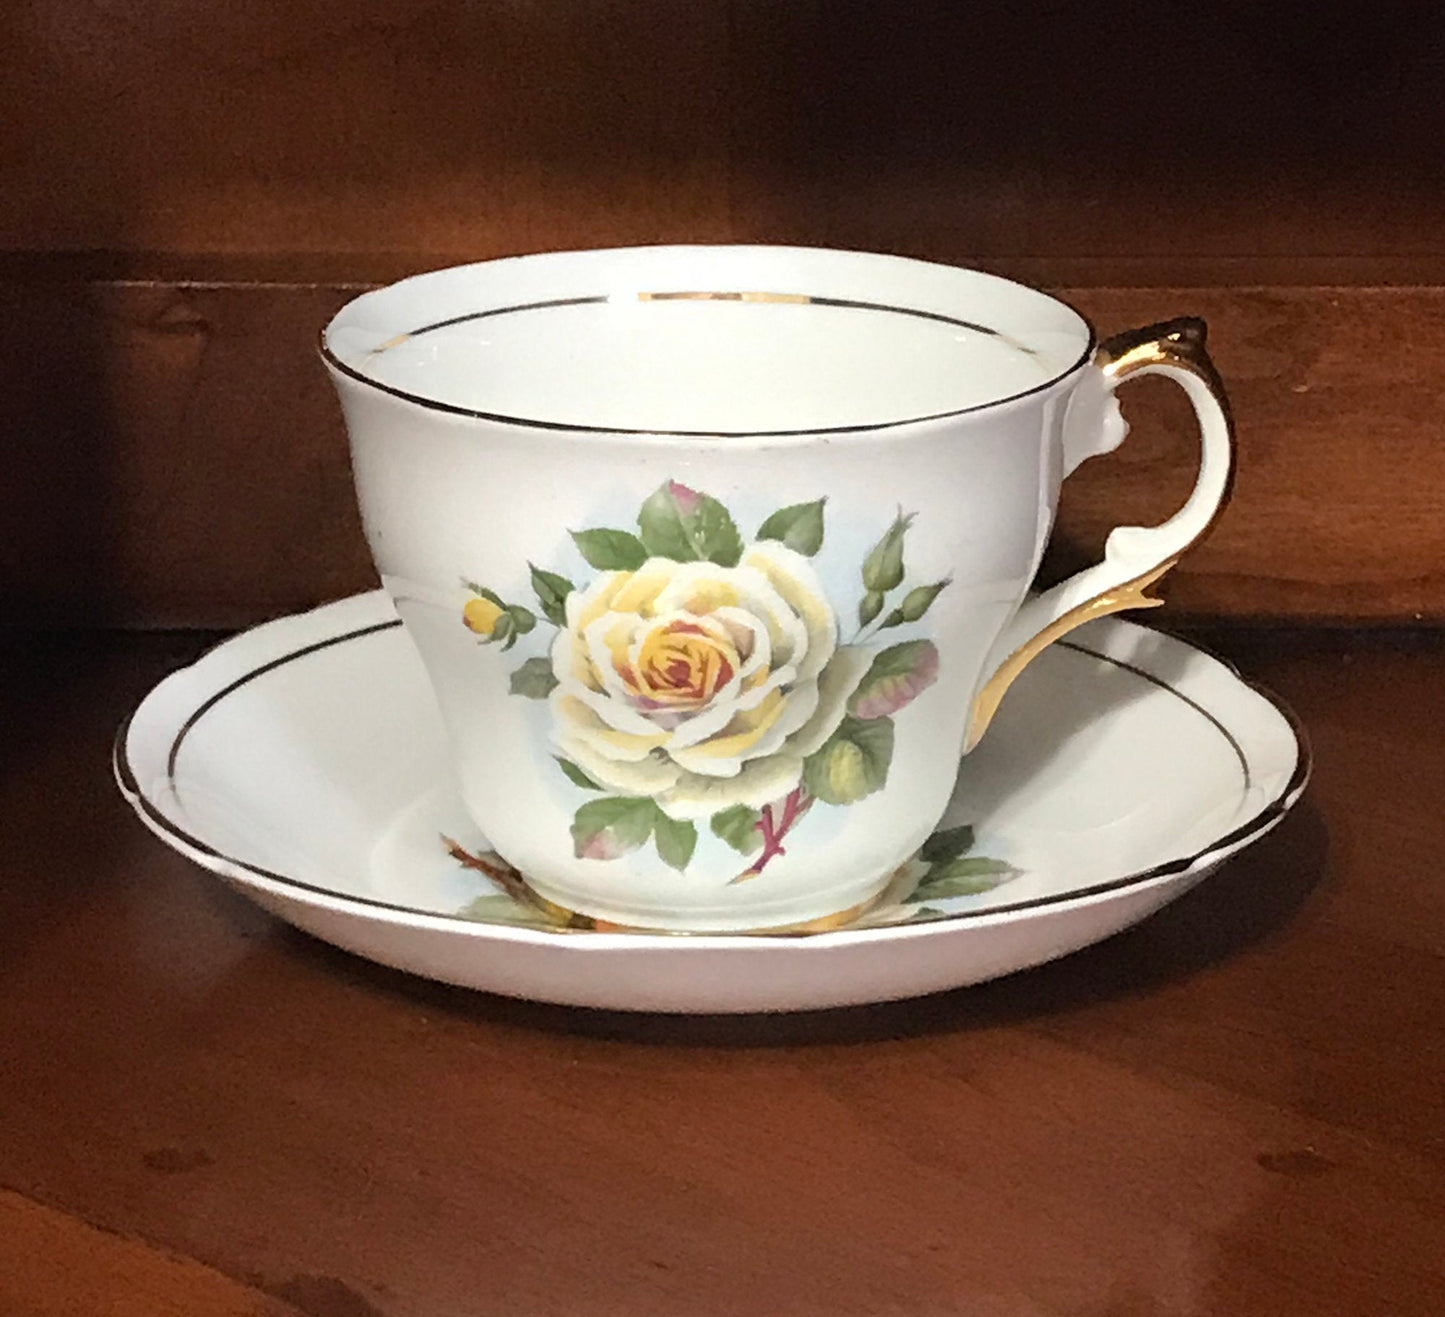 Regency Bone China Yellow Rose Cup and Saucer Set